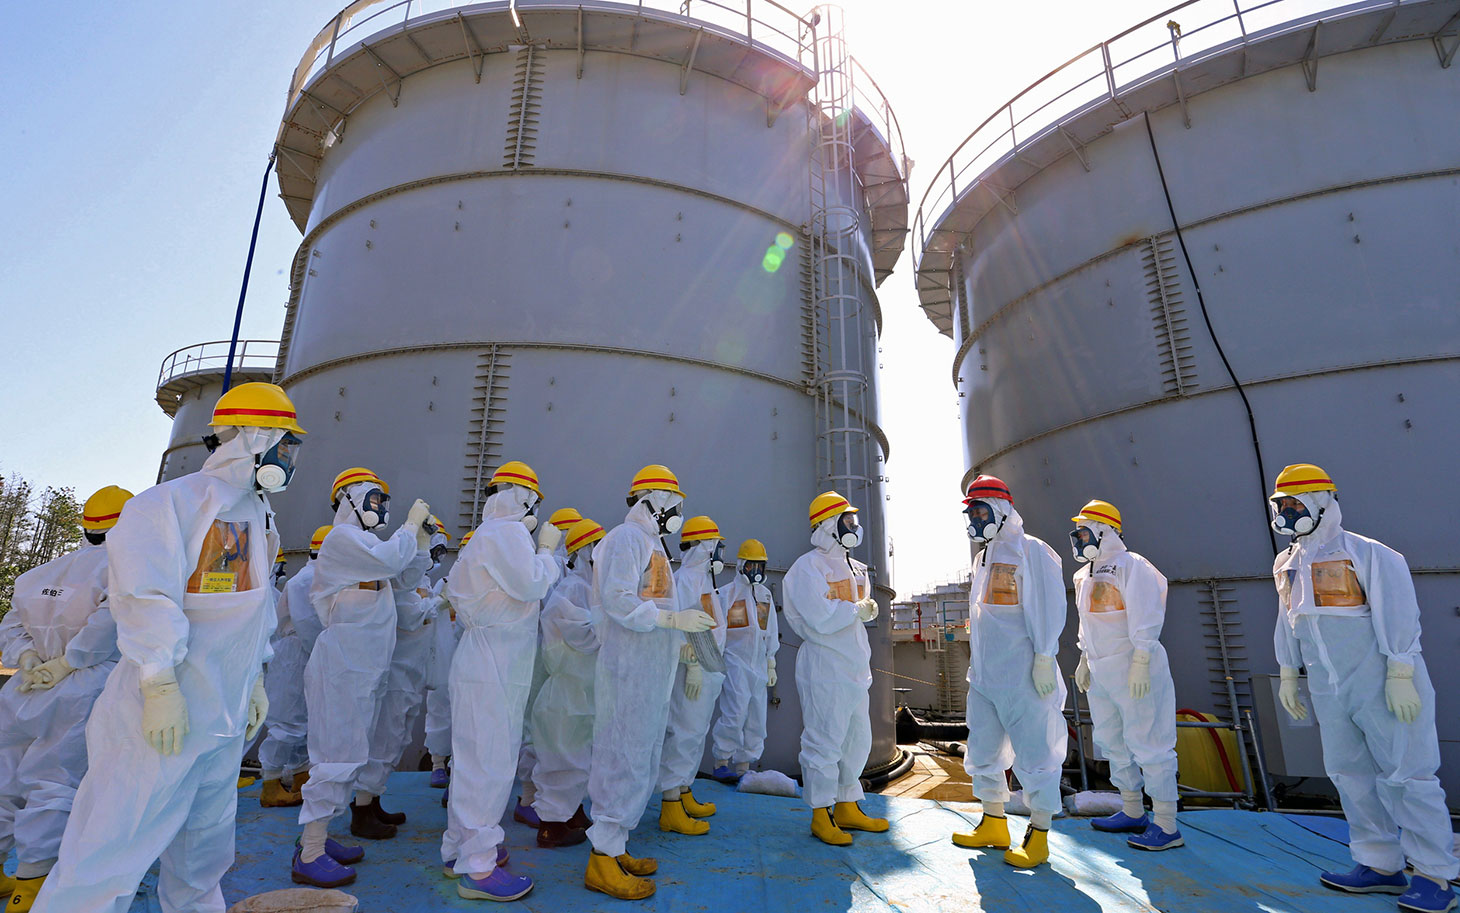 Japanese Prime Minister Shinzo Abe was briefed on the situation at the Fukushima Dai-ichi nuclear power plant as he toured the facility back on Sept. 19, 2013.  chief Akira Ono (4th L) in front of two tanks (back) which are being dismantled after leaking contaminated water, during his tour to the tsunami-crippled plant in Okuma, Fukushima Prefecture, northeastern Japan on September 19, 2013. Abe told Fukushima's operator to fix radioactive water leaks as he toured the crippled nuclear plant on September 19, less than two weeks after assuring the world the situation was under control. AFP PHOTO / Japan Pool  JAPAN OUT        (Photo credit should read JAPAN POOL/AFP/Getty Images)